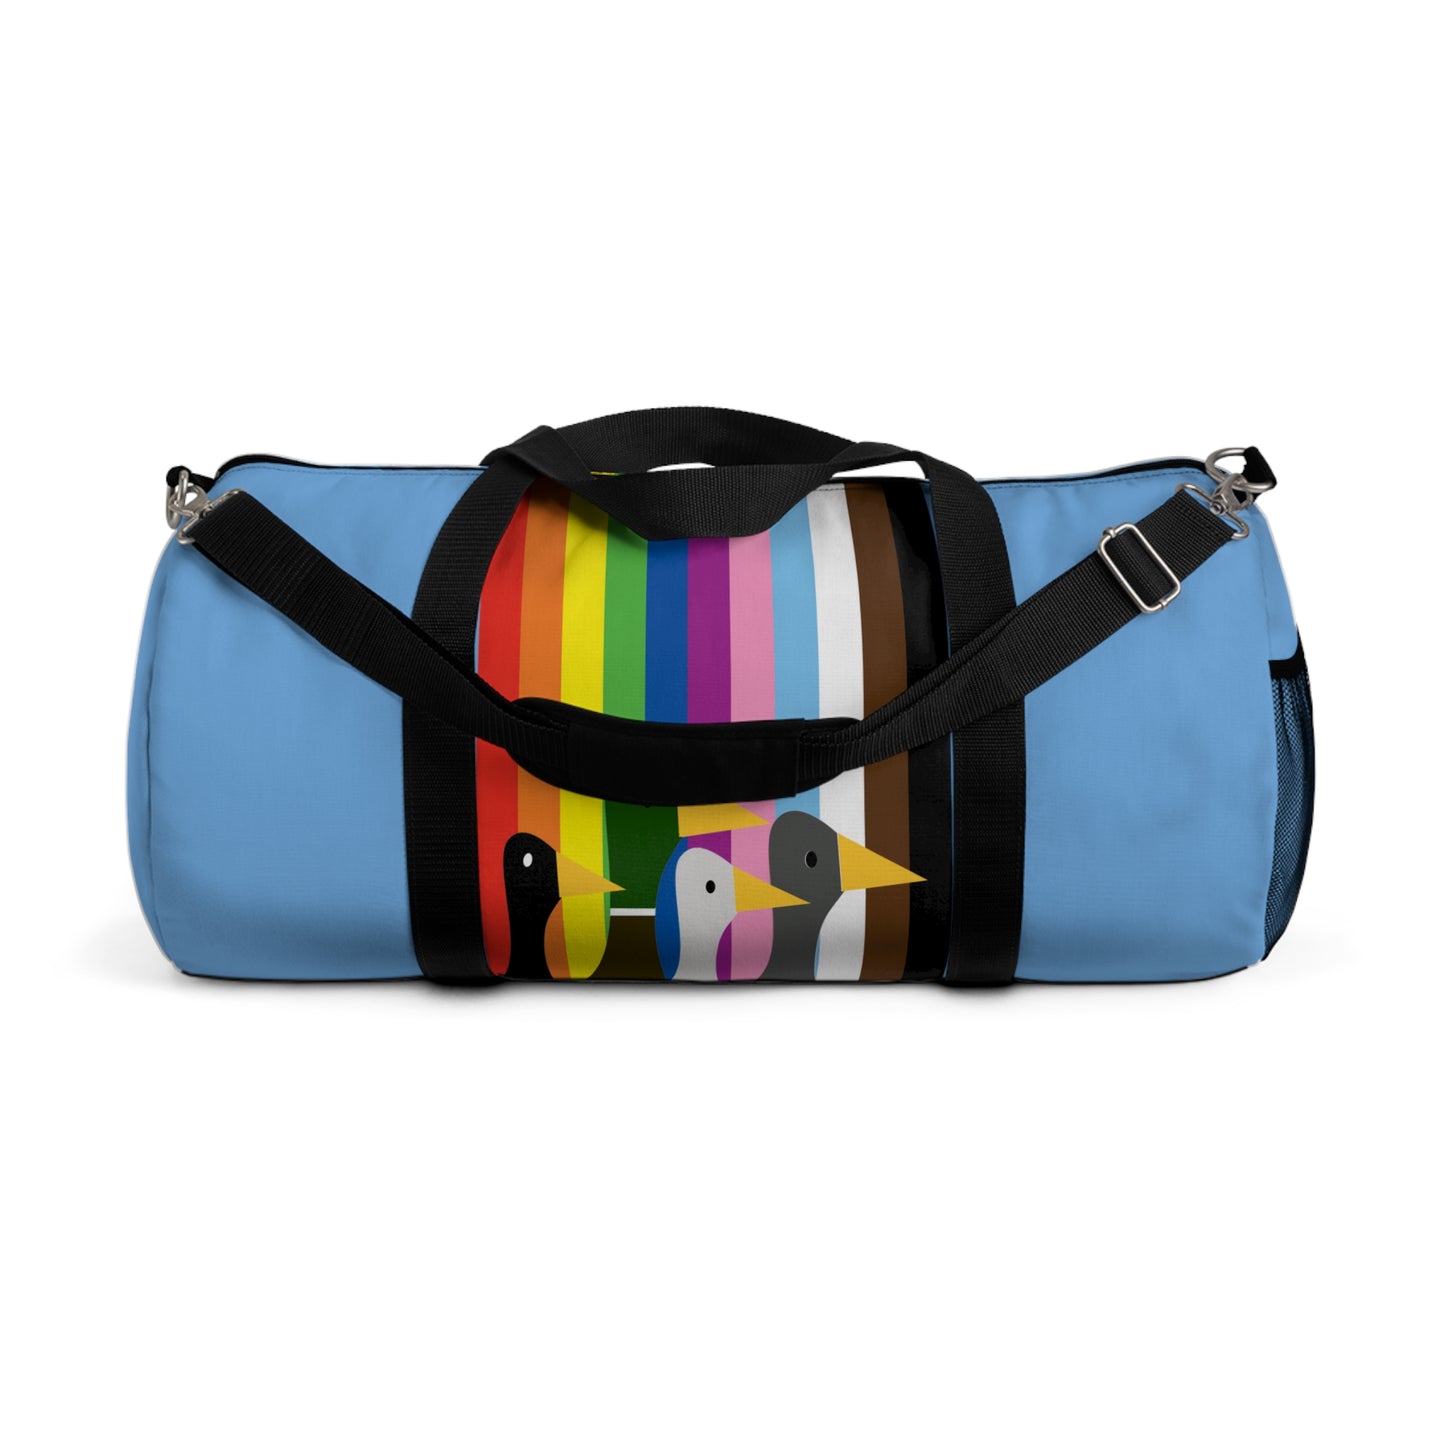 Bring the Ducks with you - Blue 73aee3 - Duffel Bag